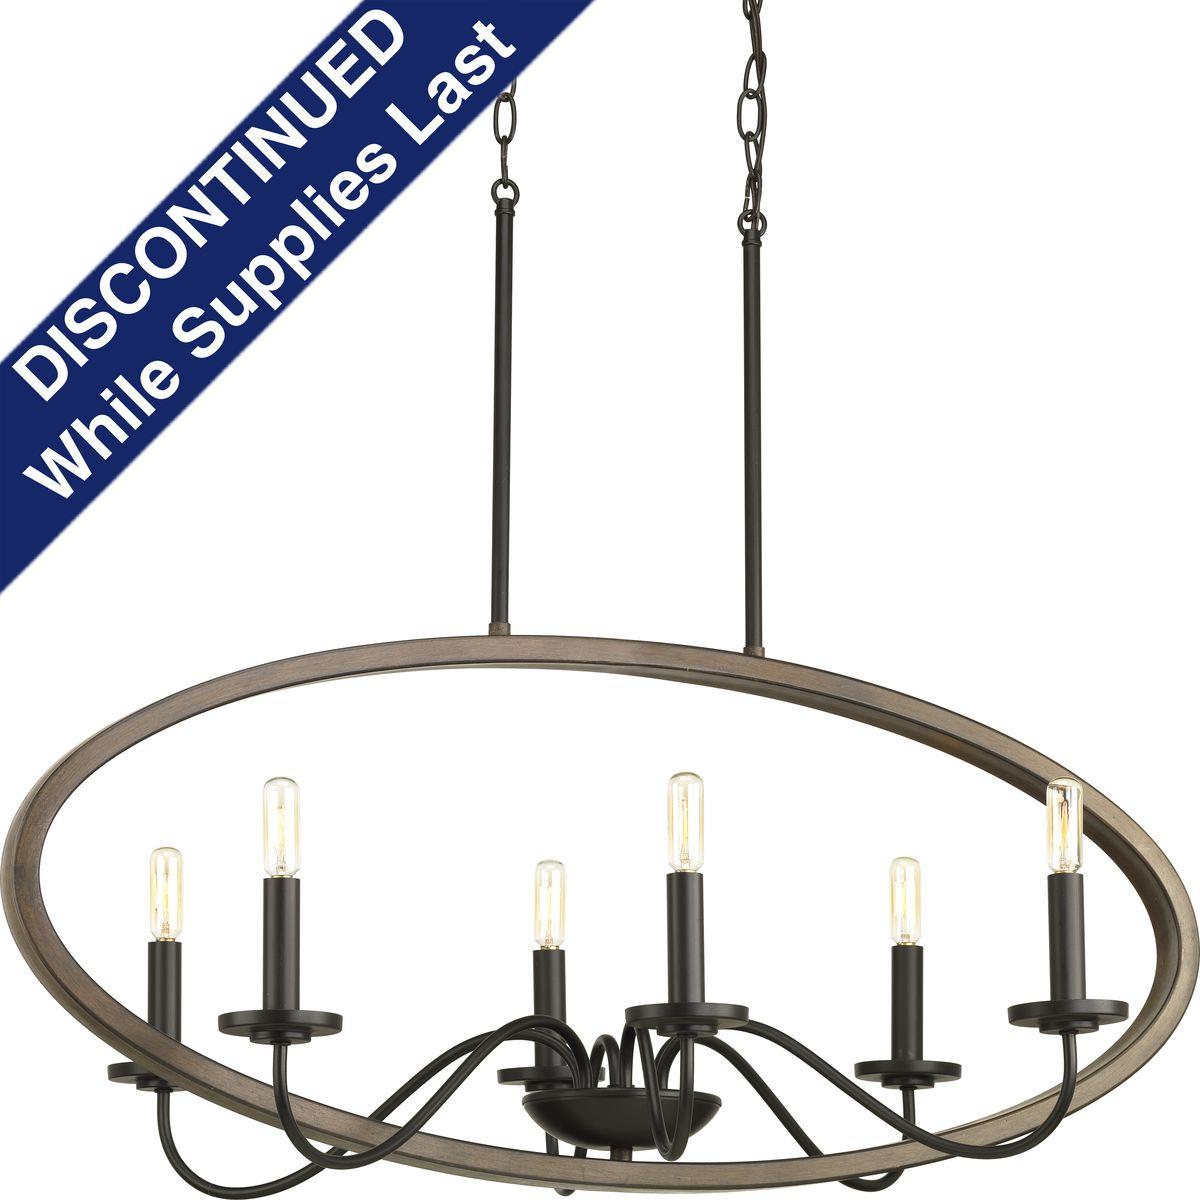 Hubbell P400082-020 With updated designs that honor the charm of early American styling, Fontayne six-light oval chandelier provides a timeless elegance to Rustic Farmhouse, Modern Farmhouse and Urban Industrial spaces. Impressive graphic elements take center stage, while ca